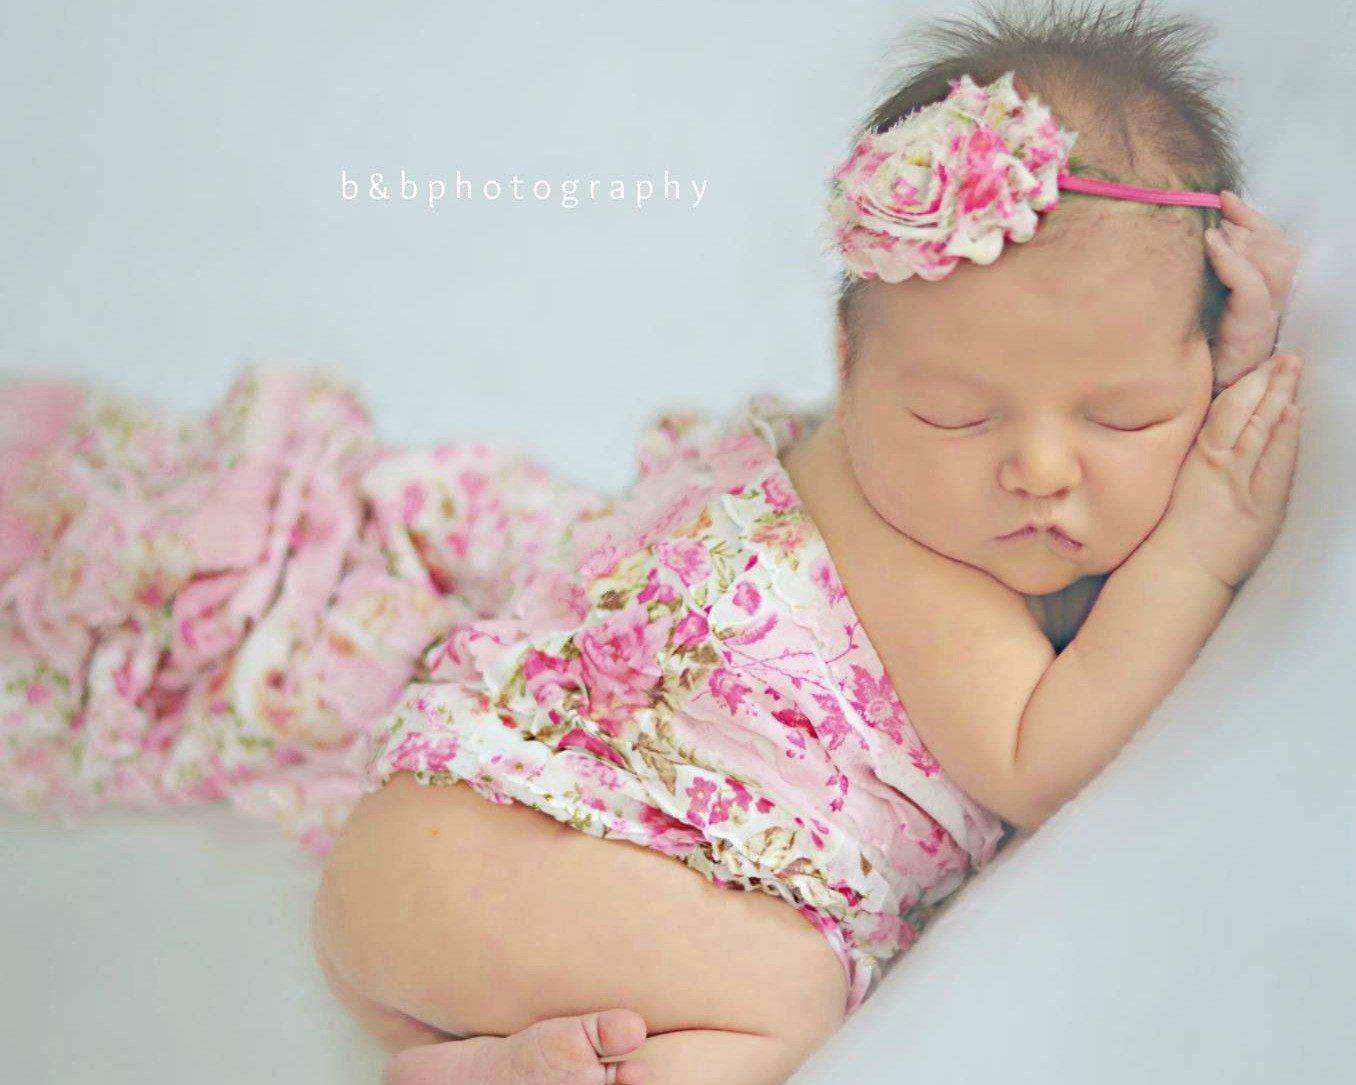 SALE Ruffle Stretch Knit Baby Wrap in Pink Floral 47X10 - Beautiful Photo Props